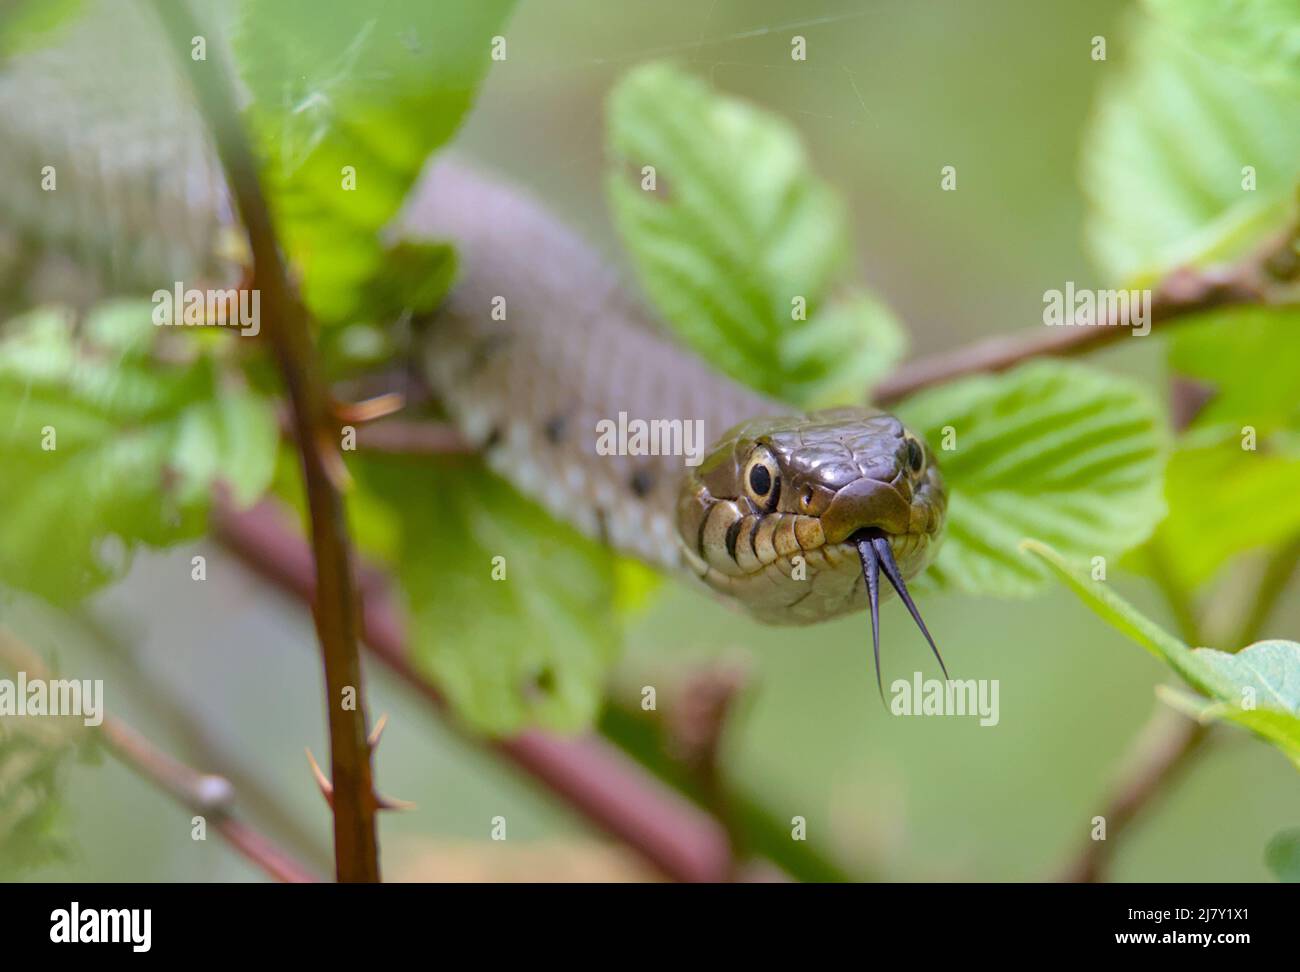 Head Shot From The Front Of A Harmless Barred Grass Snake Crawling On Brambles, Natrix helvetica, Tasting, Sensing The Air With Its Forked Tongue, UK Stock Photo